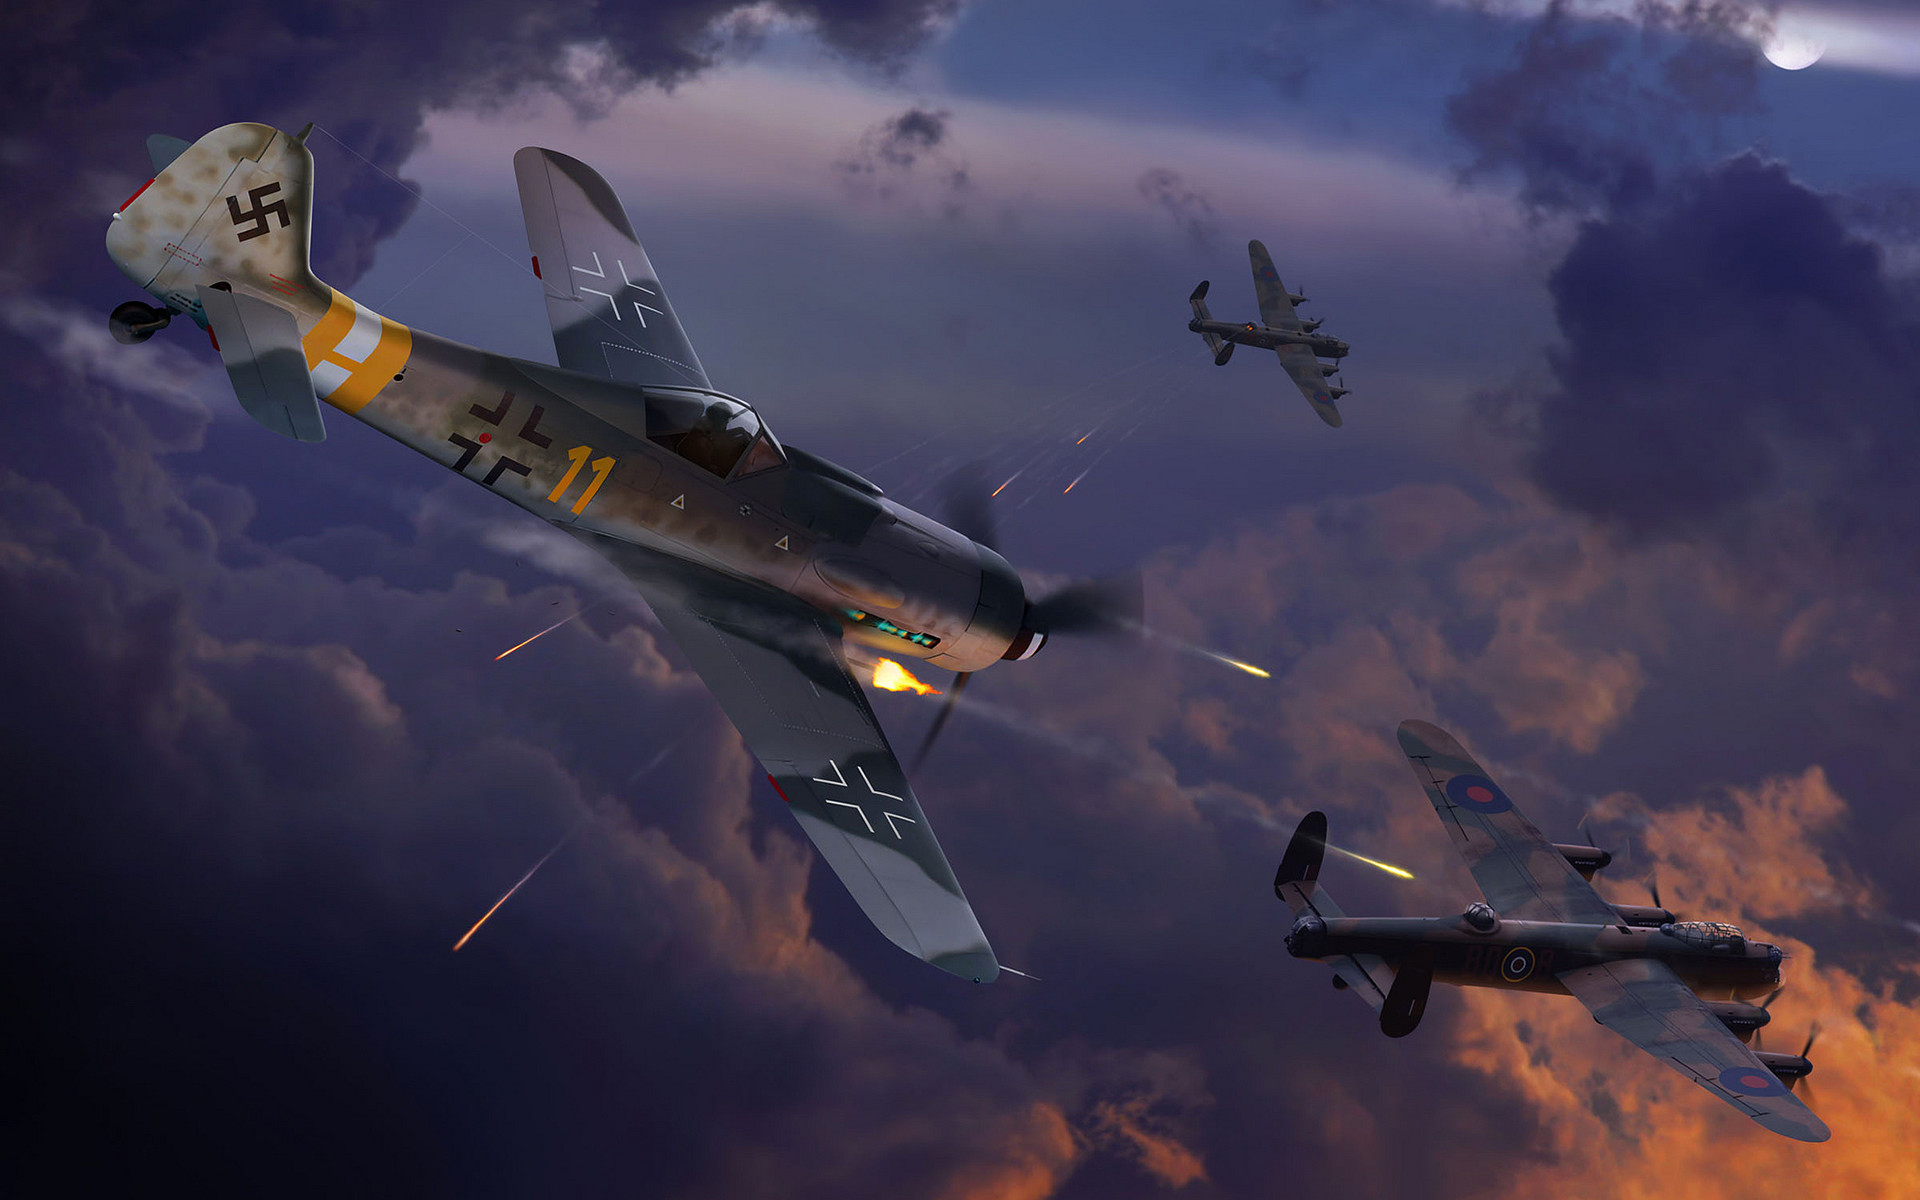 1920x1200, Download Wwii Aircraft Wallpaper Gallery - Dogfight Ww2 Plane Fight - HD Wallpaper 